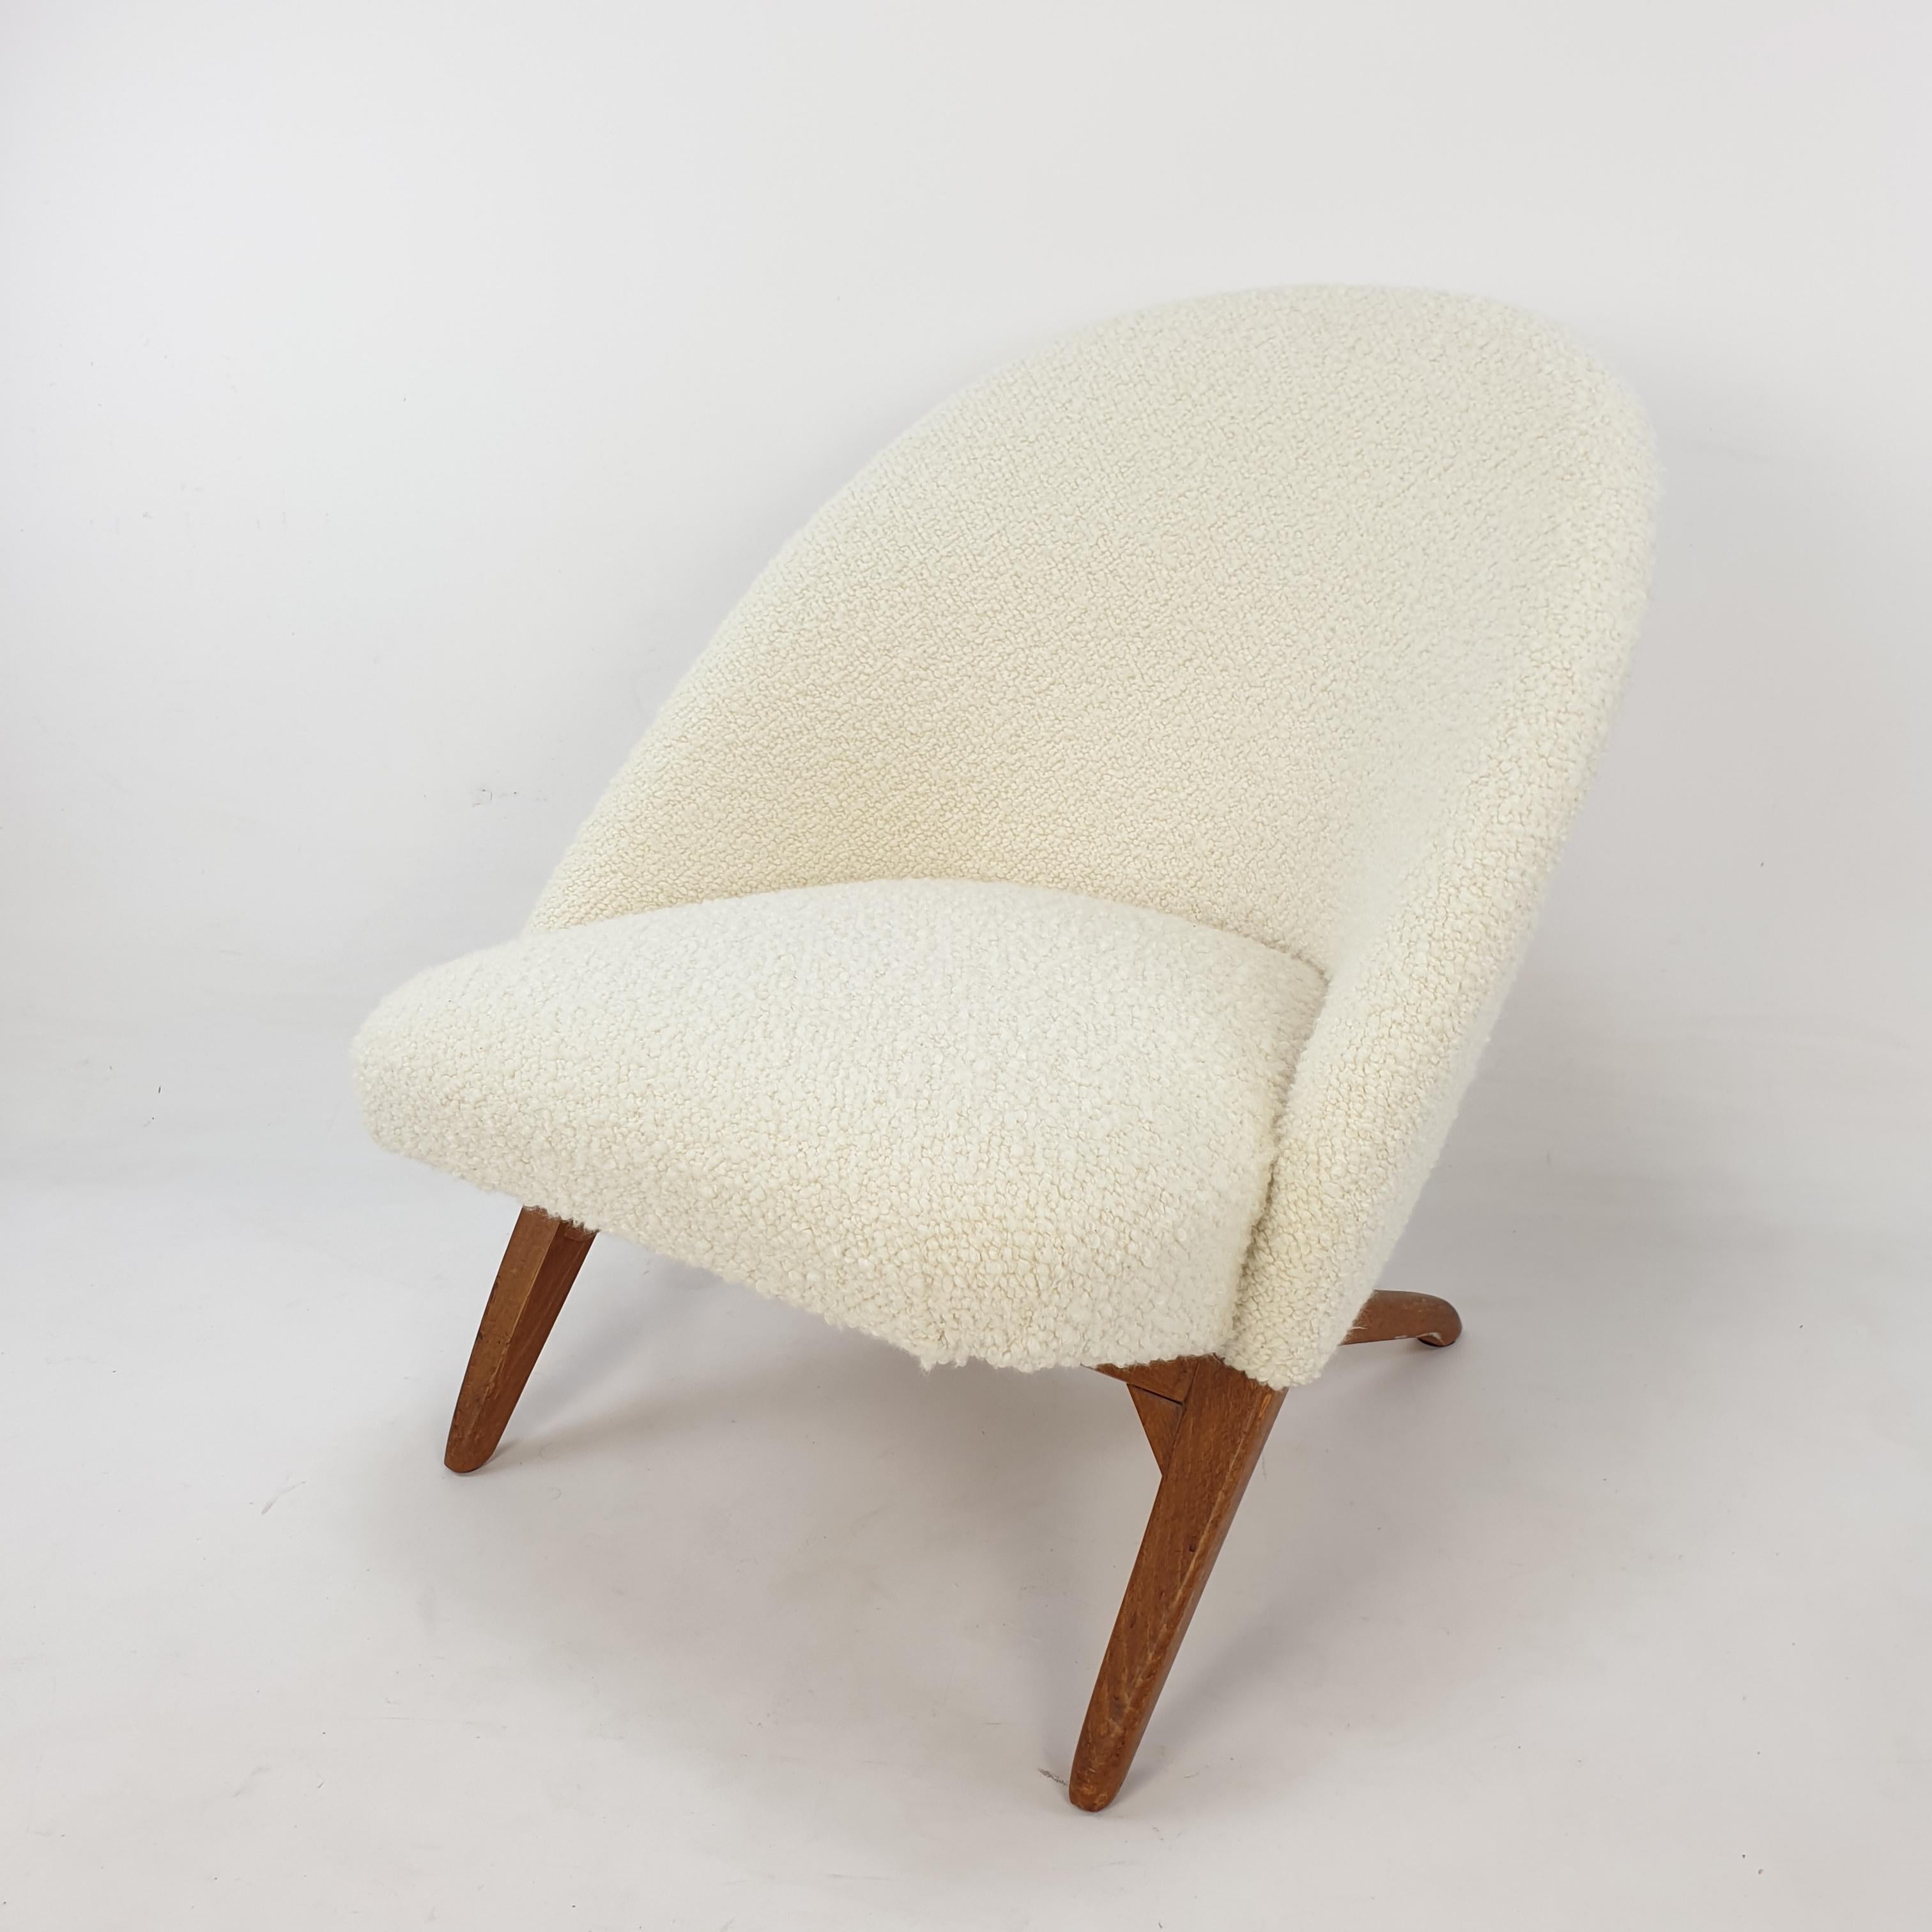 Stunning Mid-Century Modern set of lounge chairs, designed by Theo Ruth for Artifort in the 50s.
The back and the seater are 2 separate pieces that easily fits together and makes it a comfortable chair.
The chairs are restored with lovely bouclé